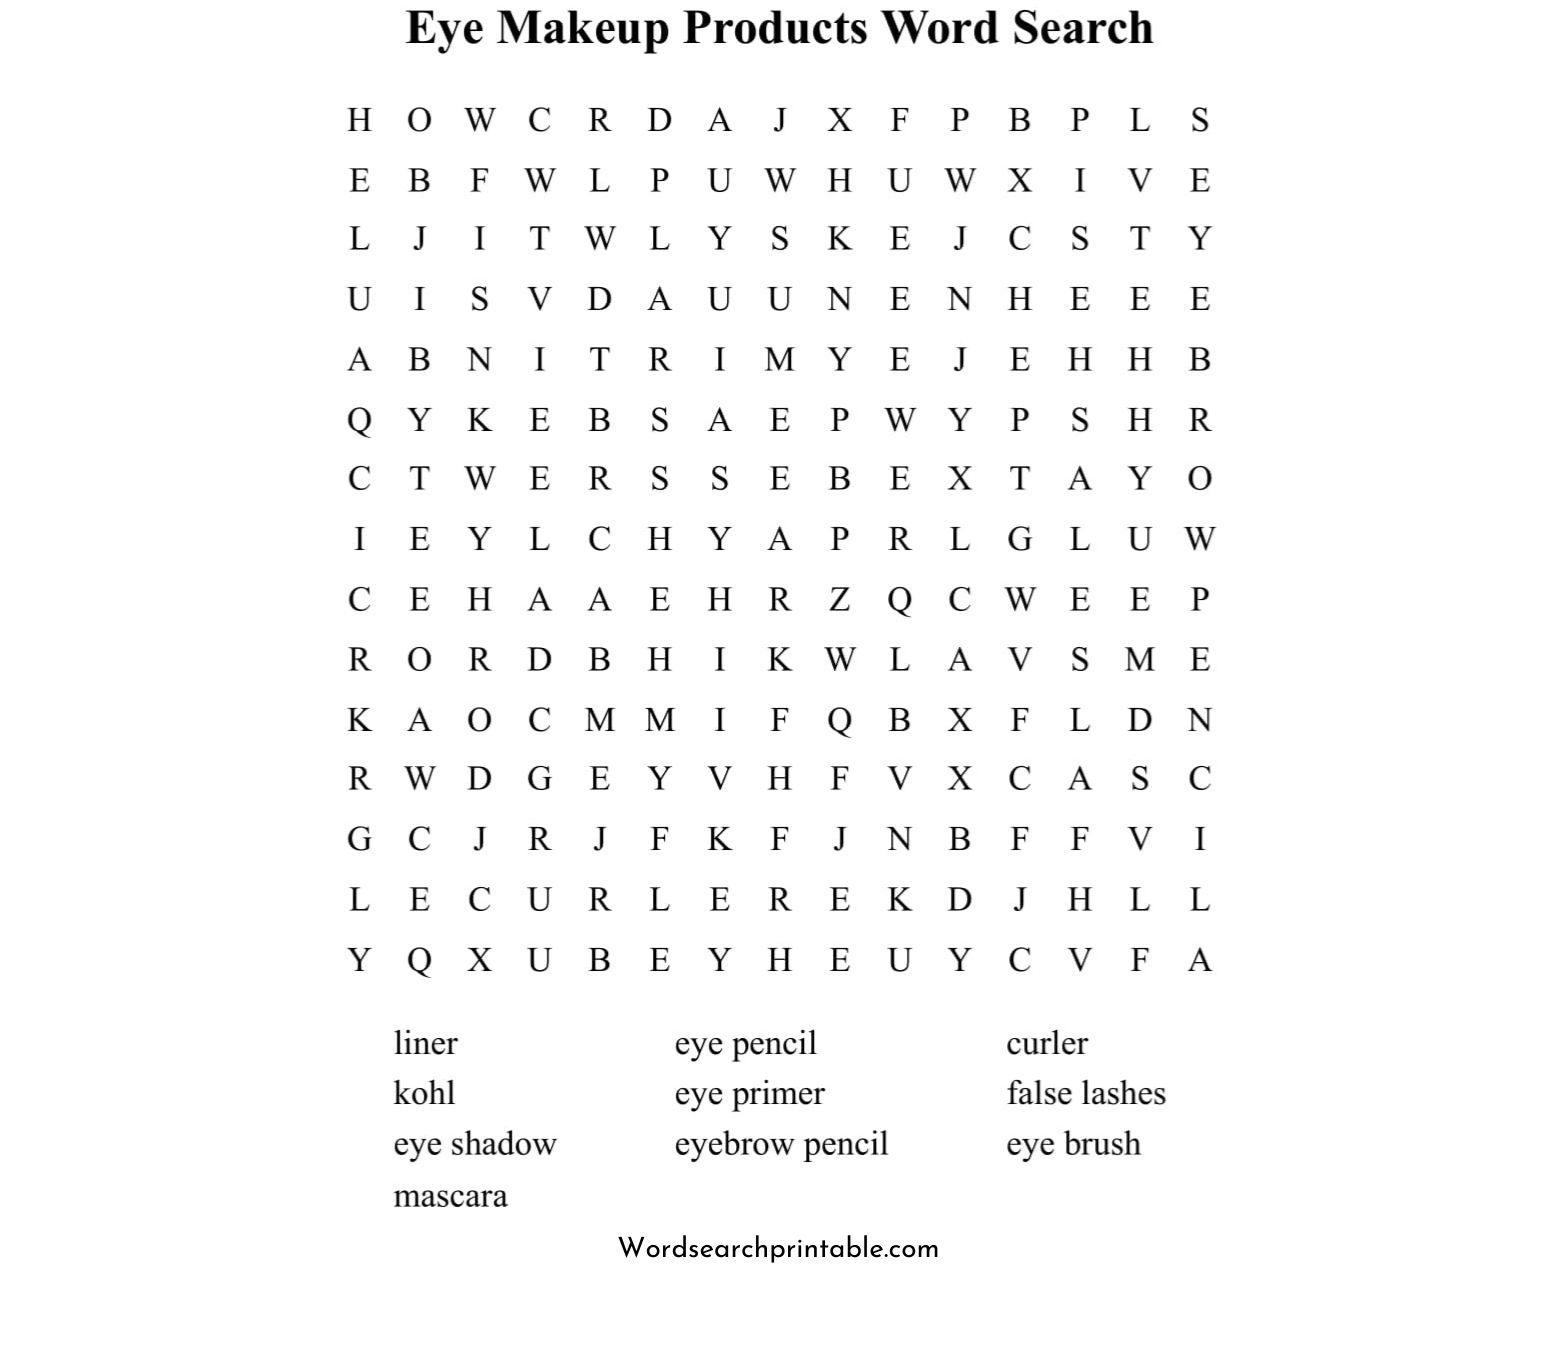 eye makeup products word search puzzle